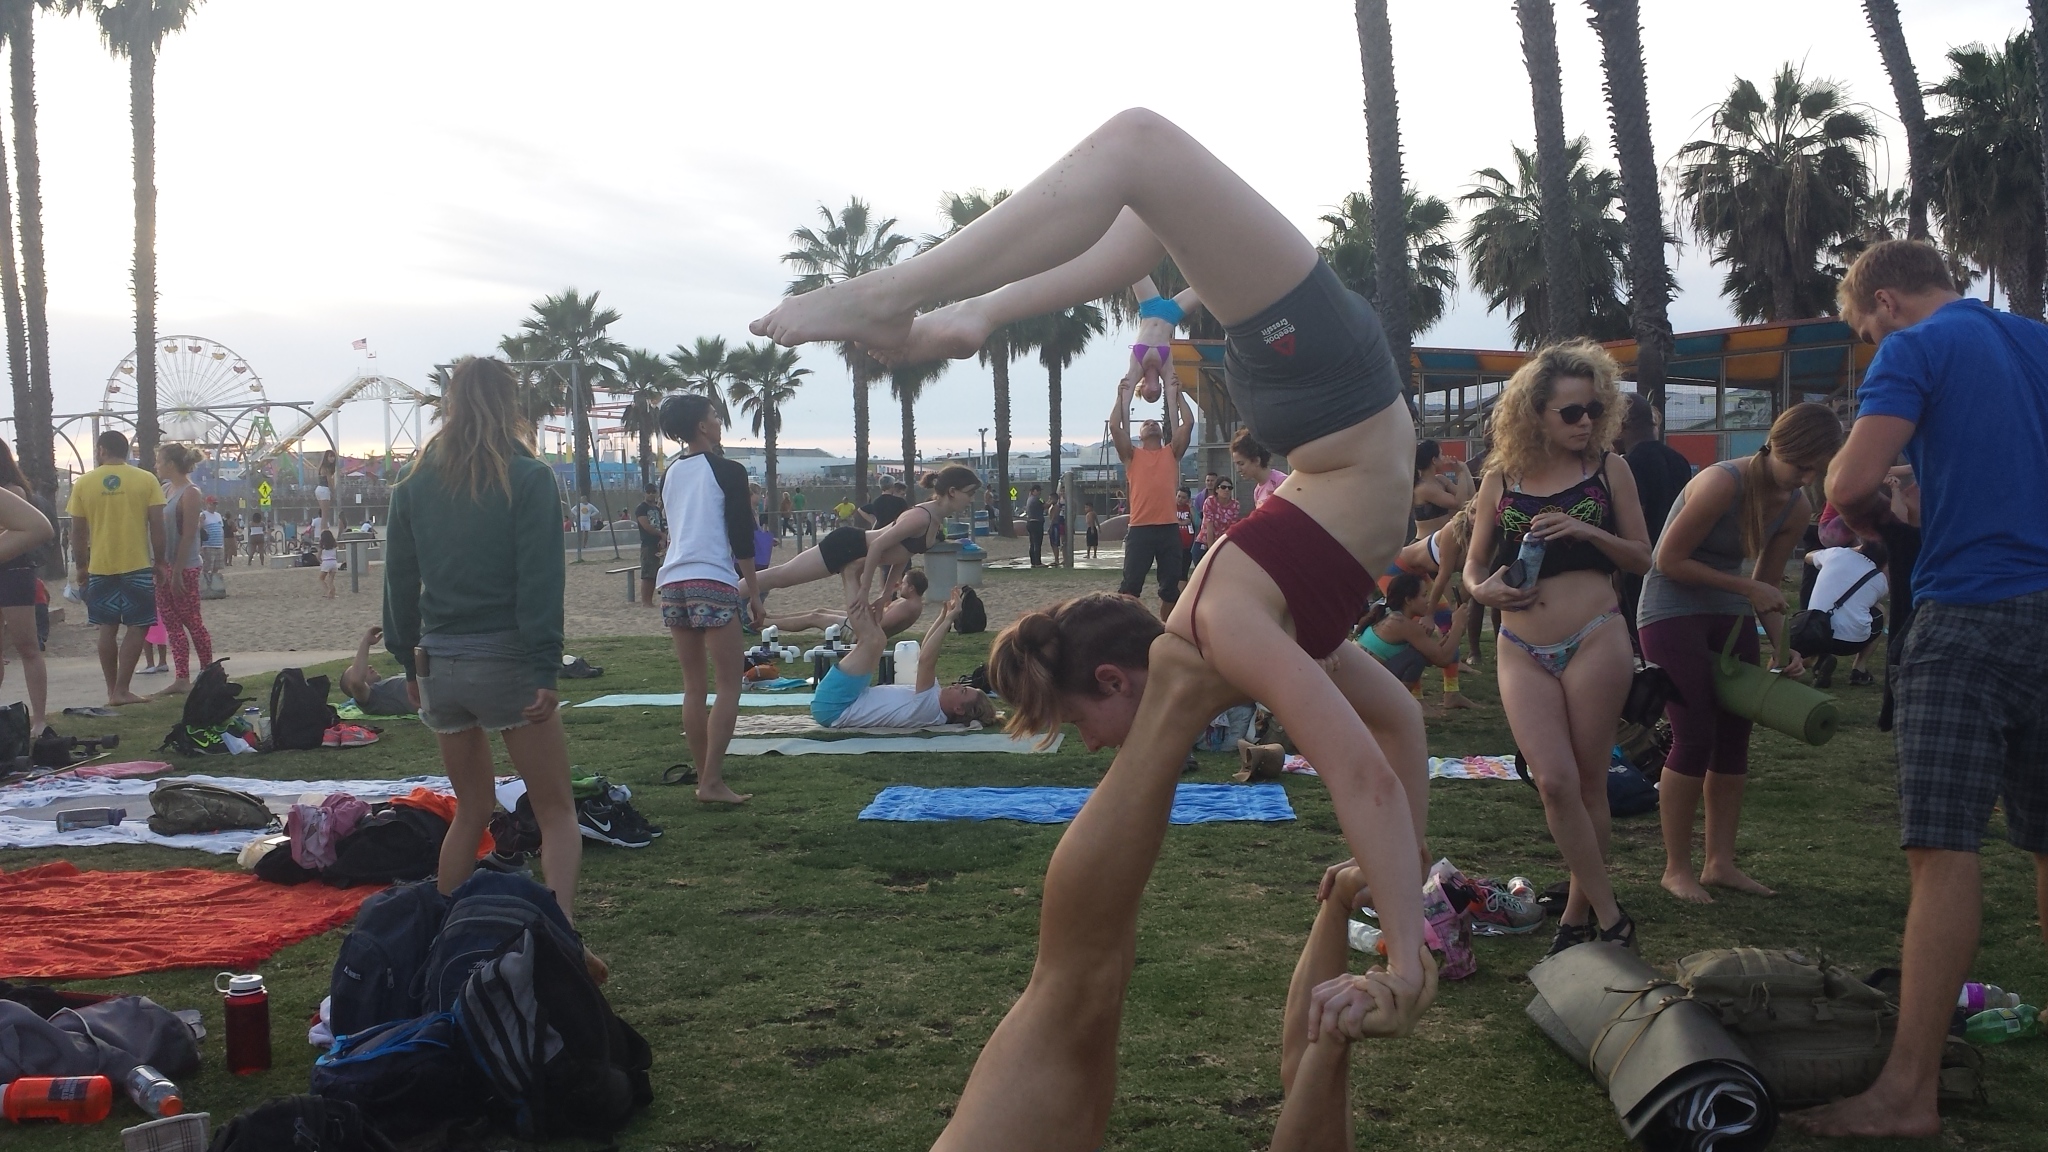 SoCal Acro Yoga Convergence – What makes you happy?